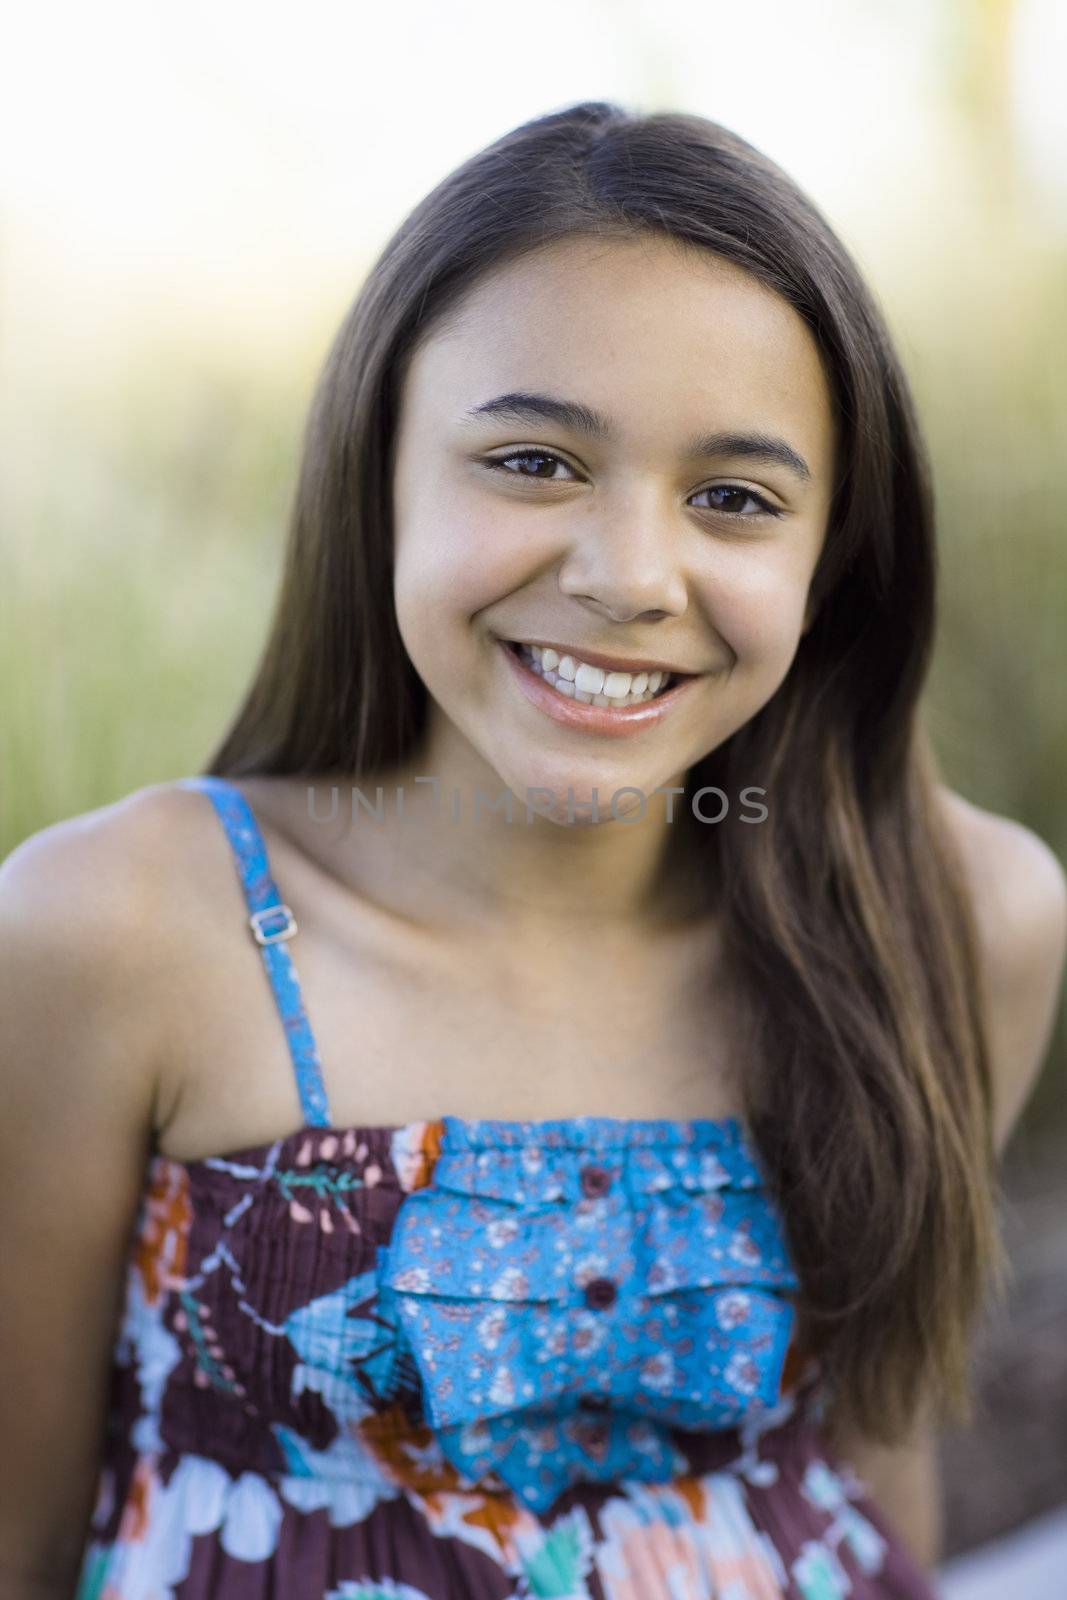 Tween Girl Smiling To Camera by ptimages